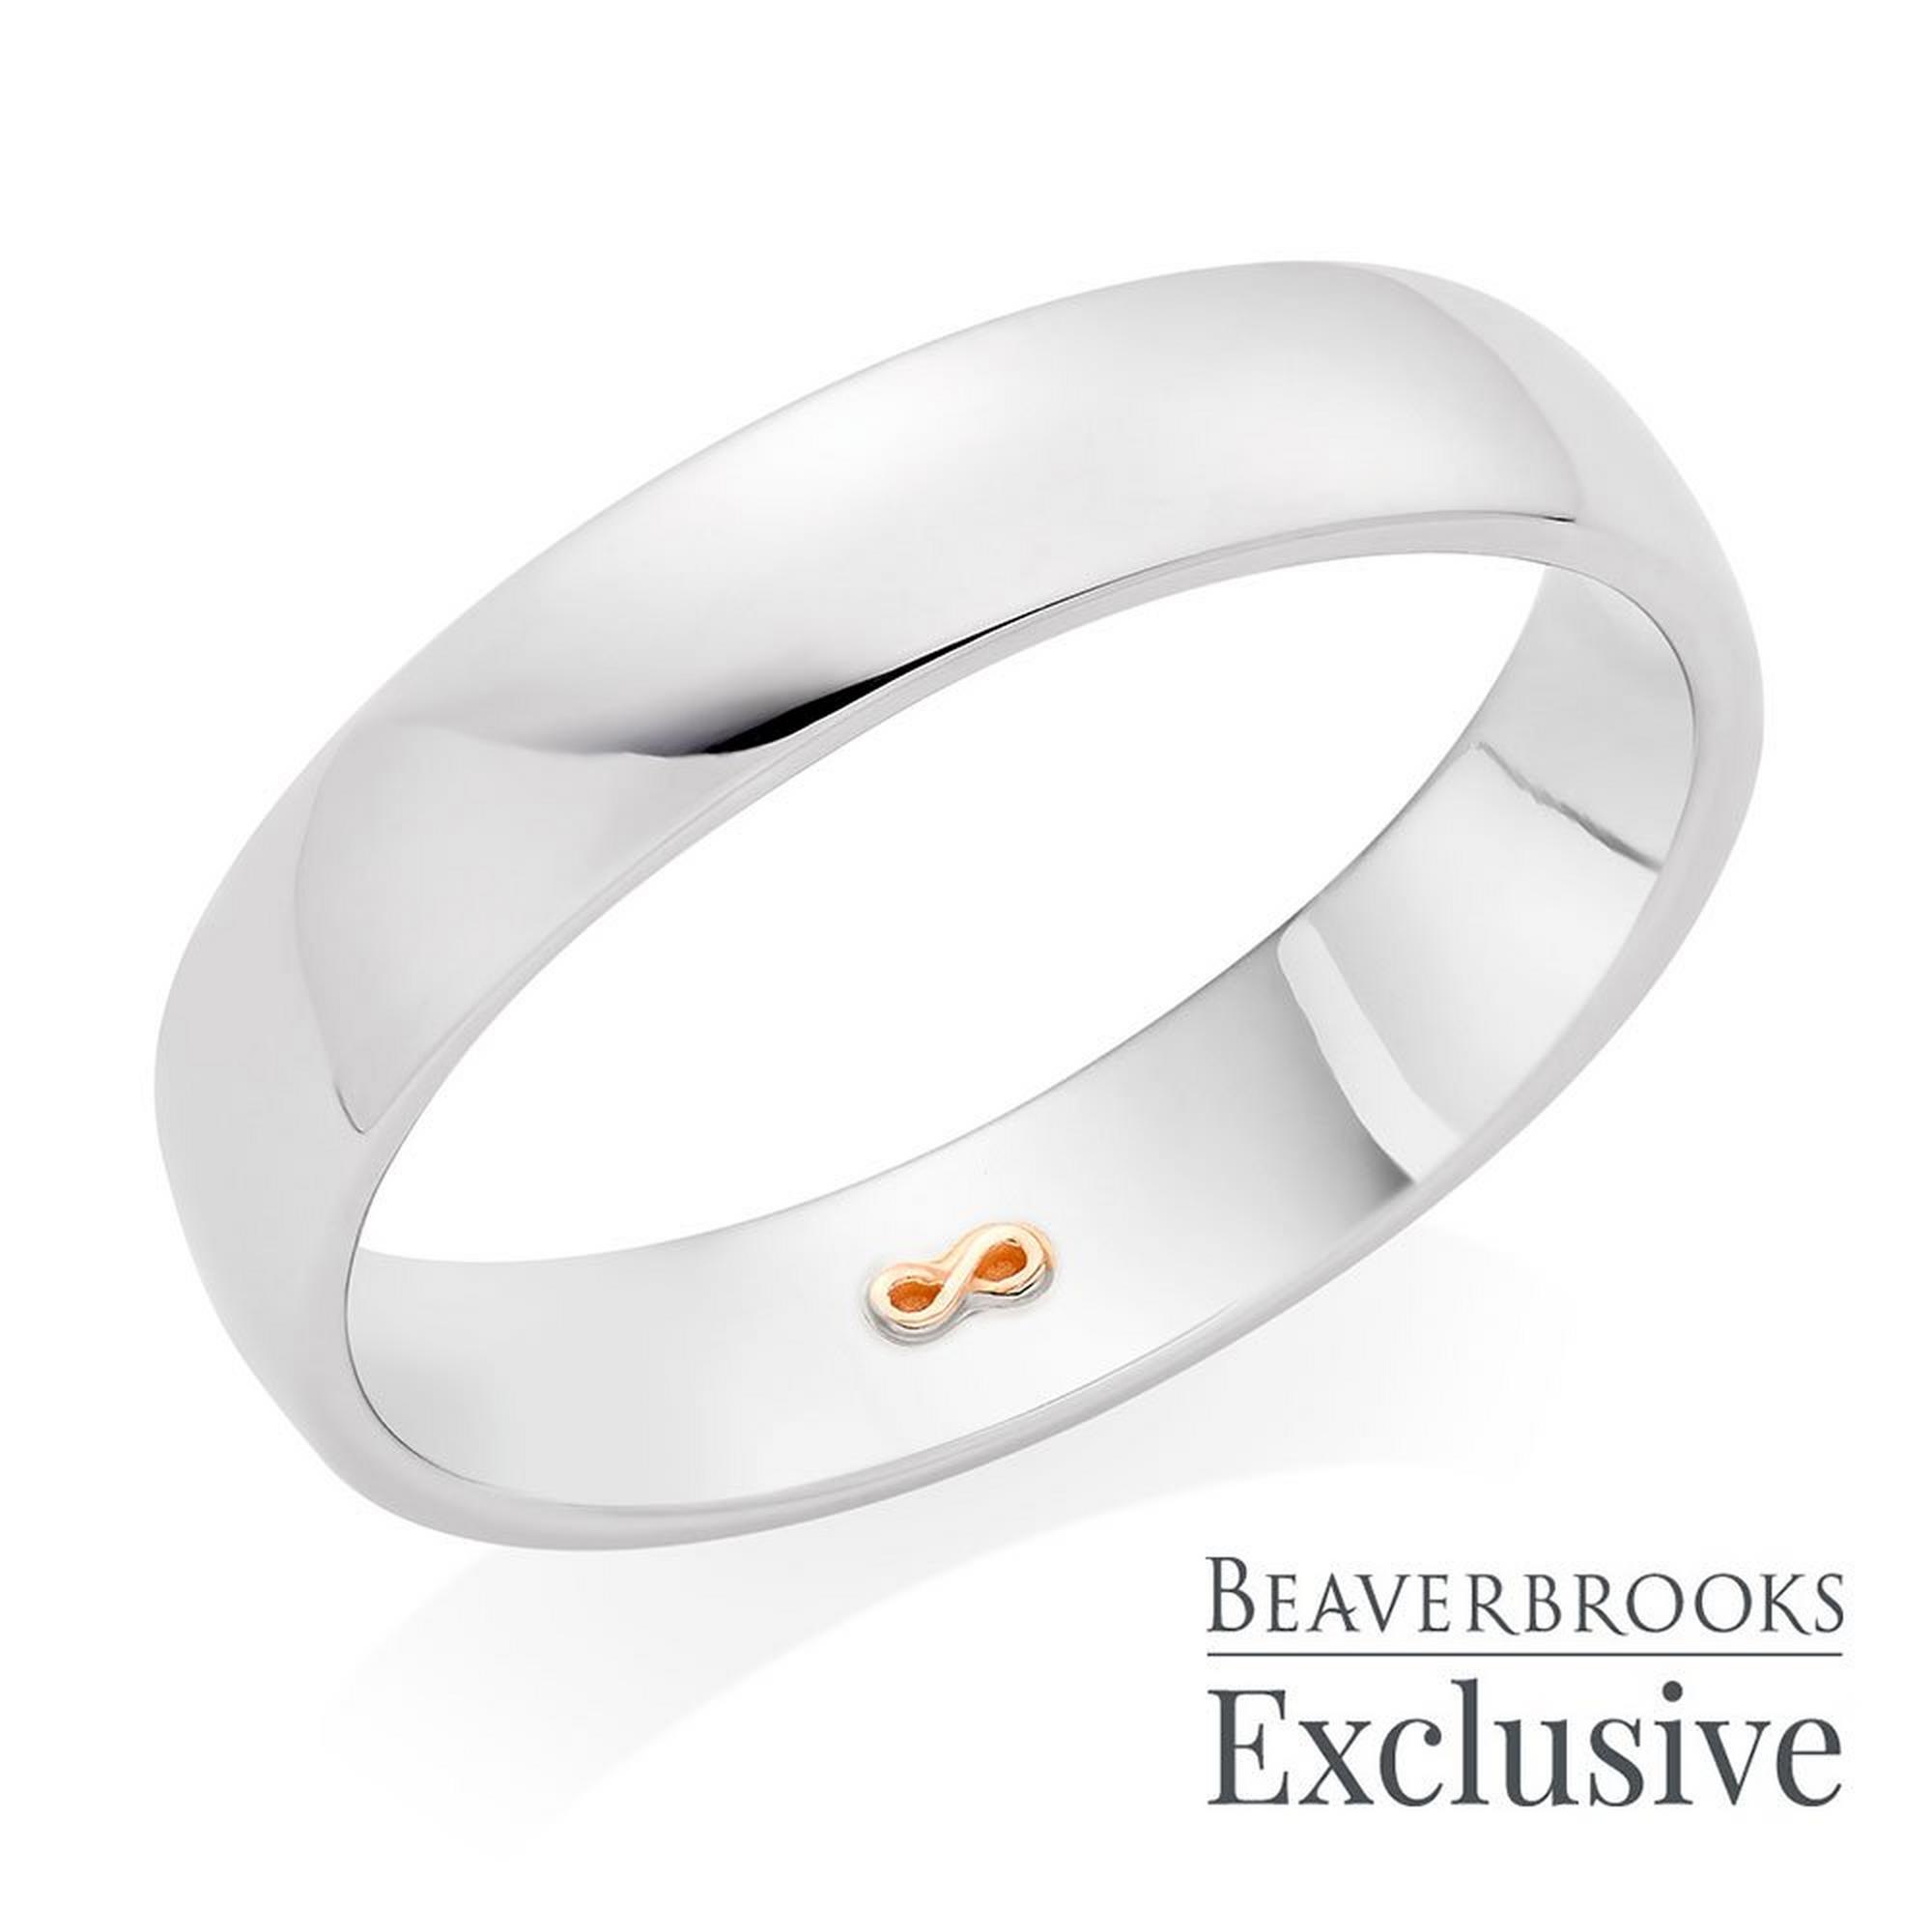 Beyond Brilliance 18ct White Gold and Rose Gold Infinity Men's Wedding Ring